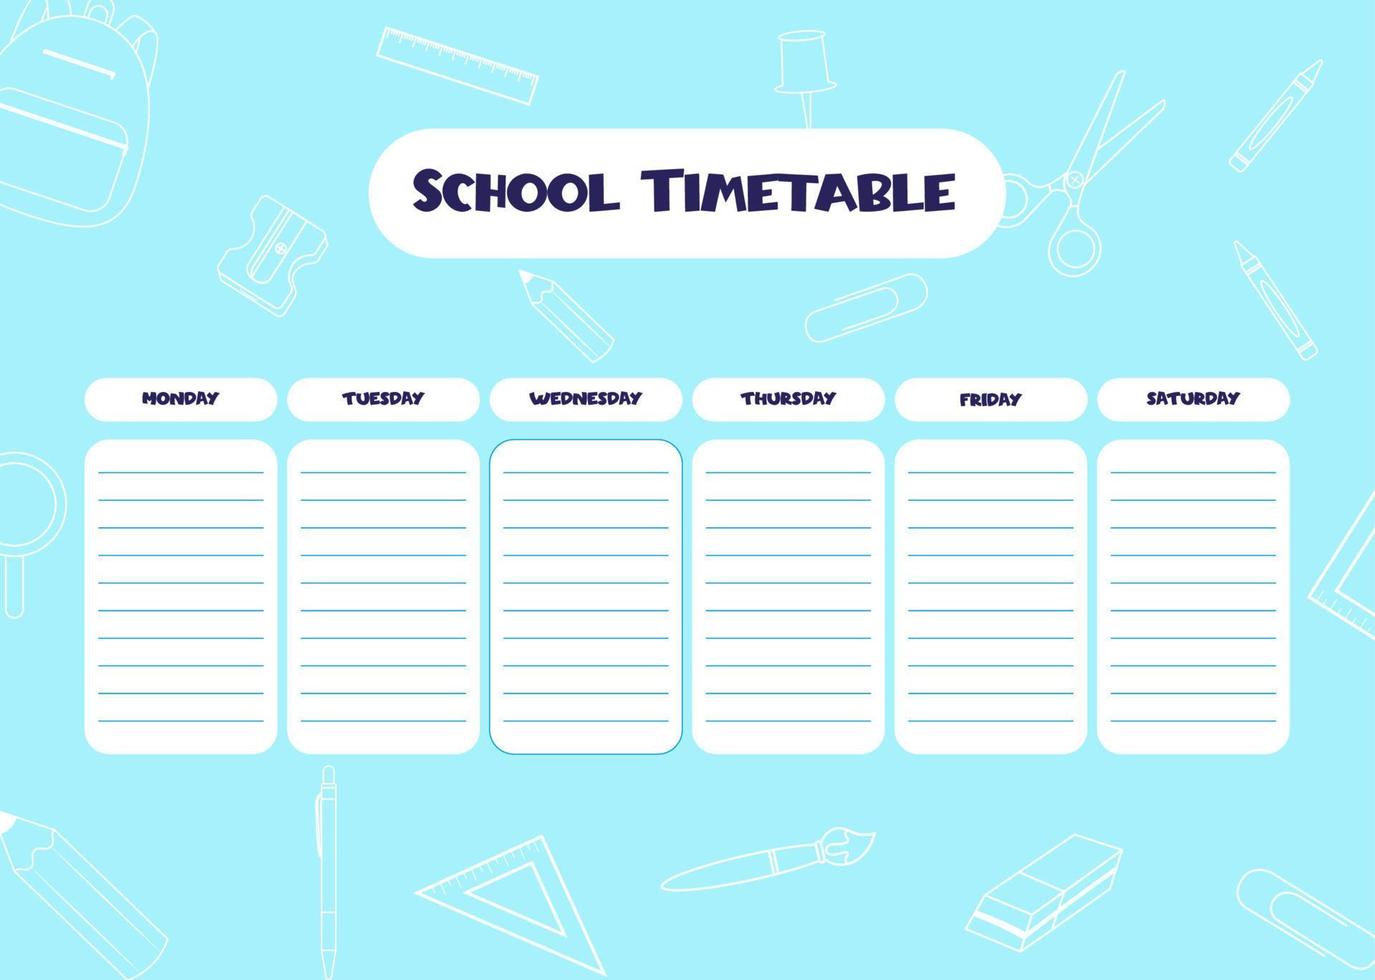 School schedule. Timetable for kids. Weekly time table with day of the week. Educational classes diary. A4 paper size. vector